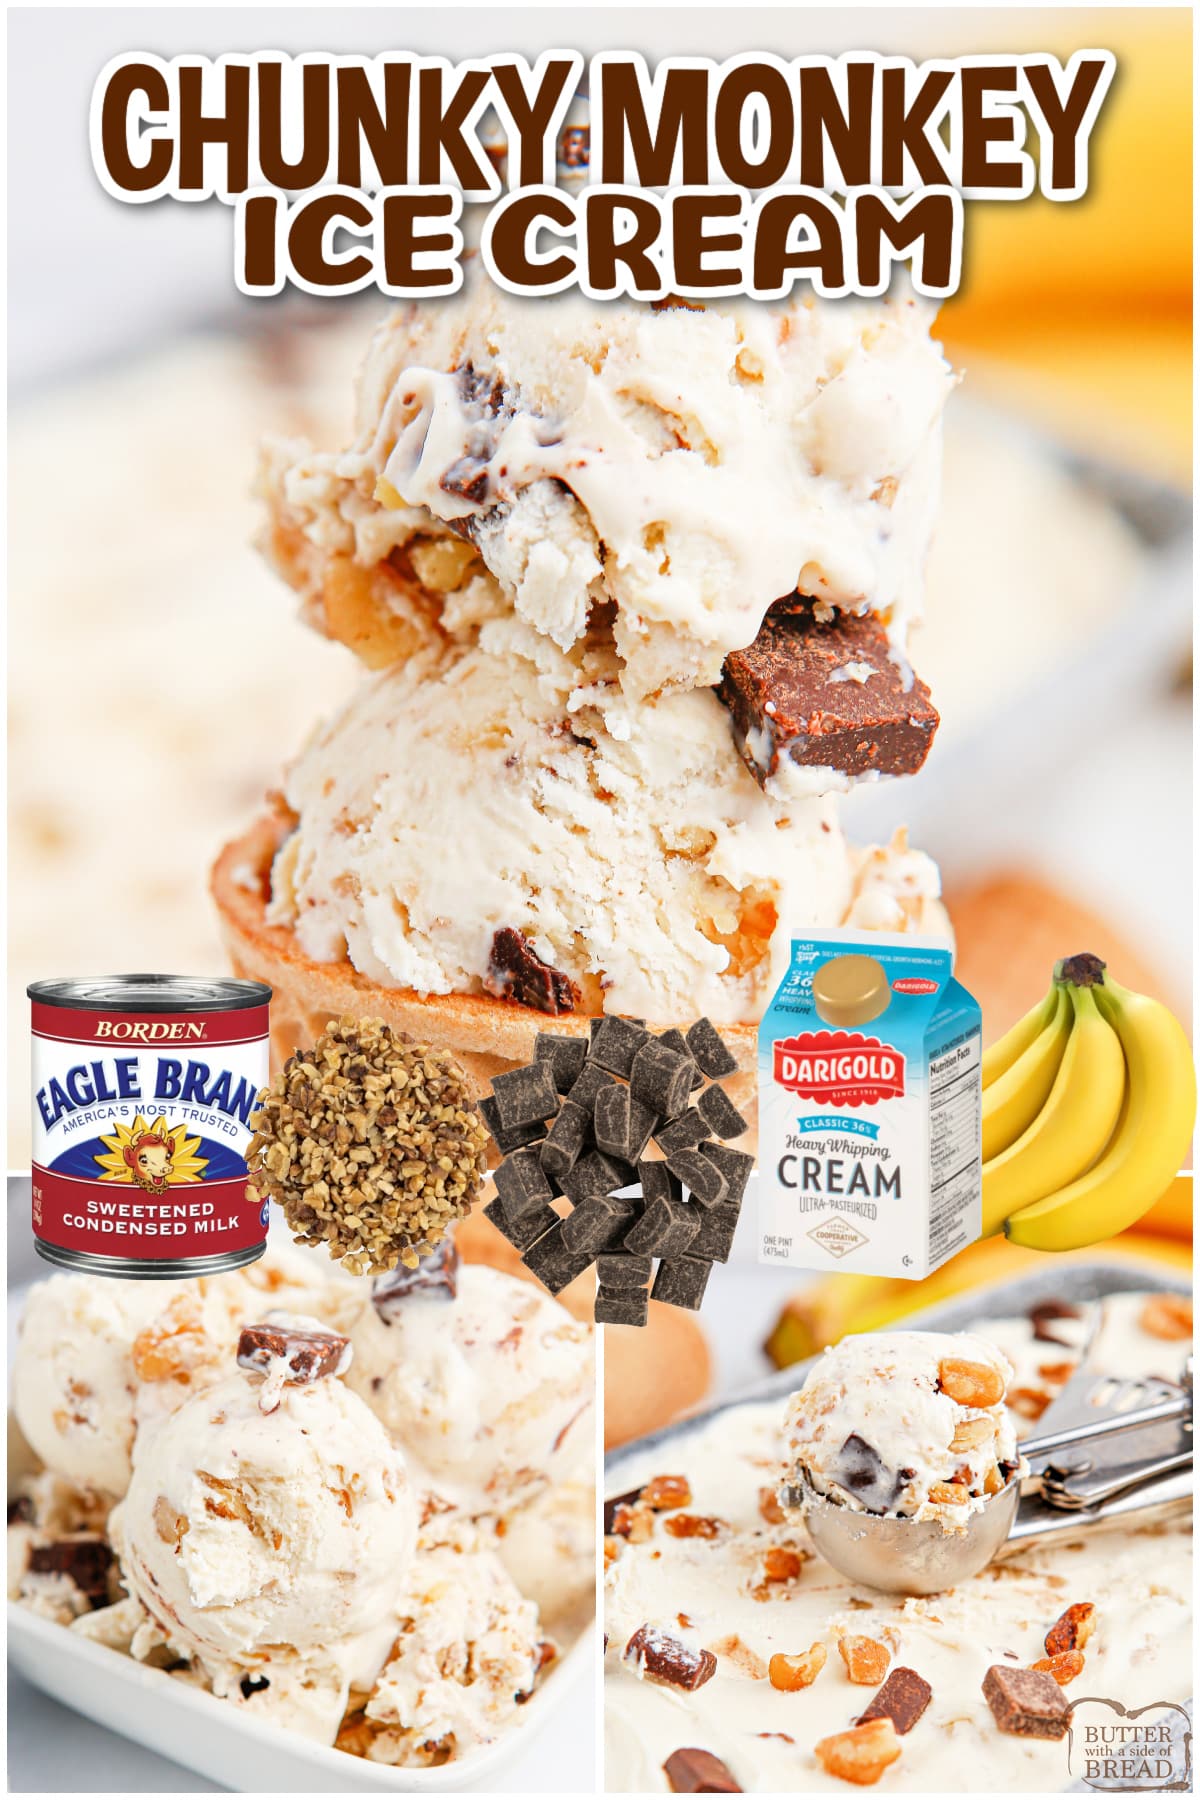 Chunky Monkey Ice Cream made with bananas, dark chocolate chunks and walnuts, no ice cream maker required. This rich, creamy version of the popular Ben & Jerry's ice cream is so easy to make!